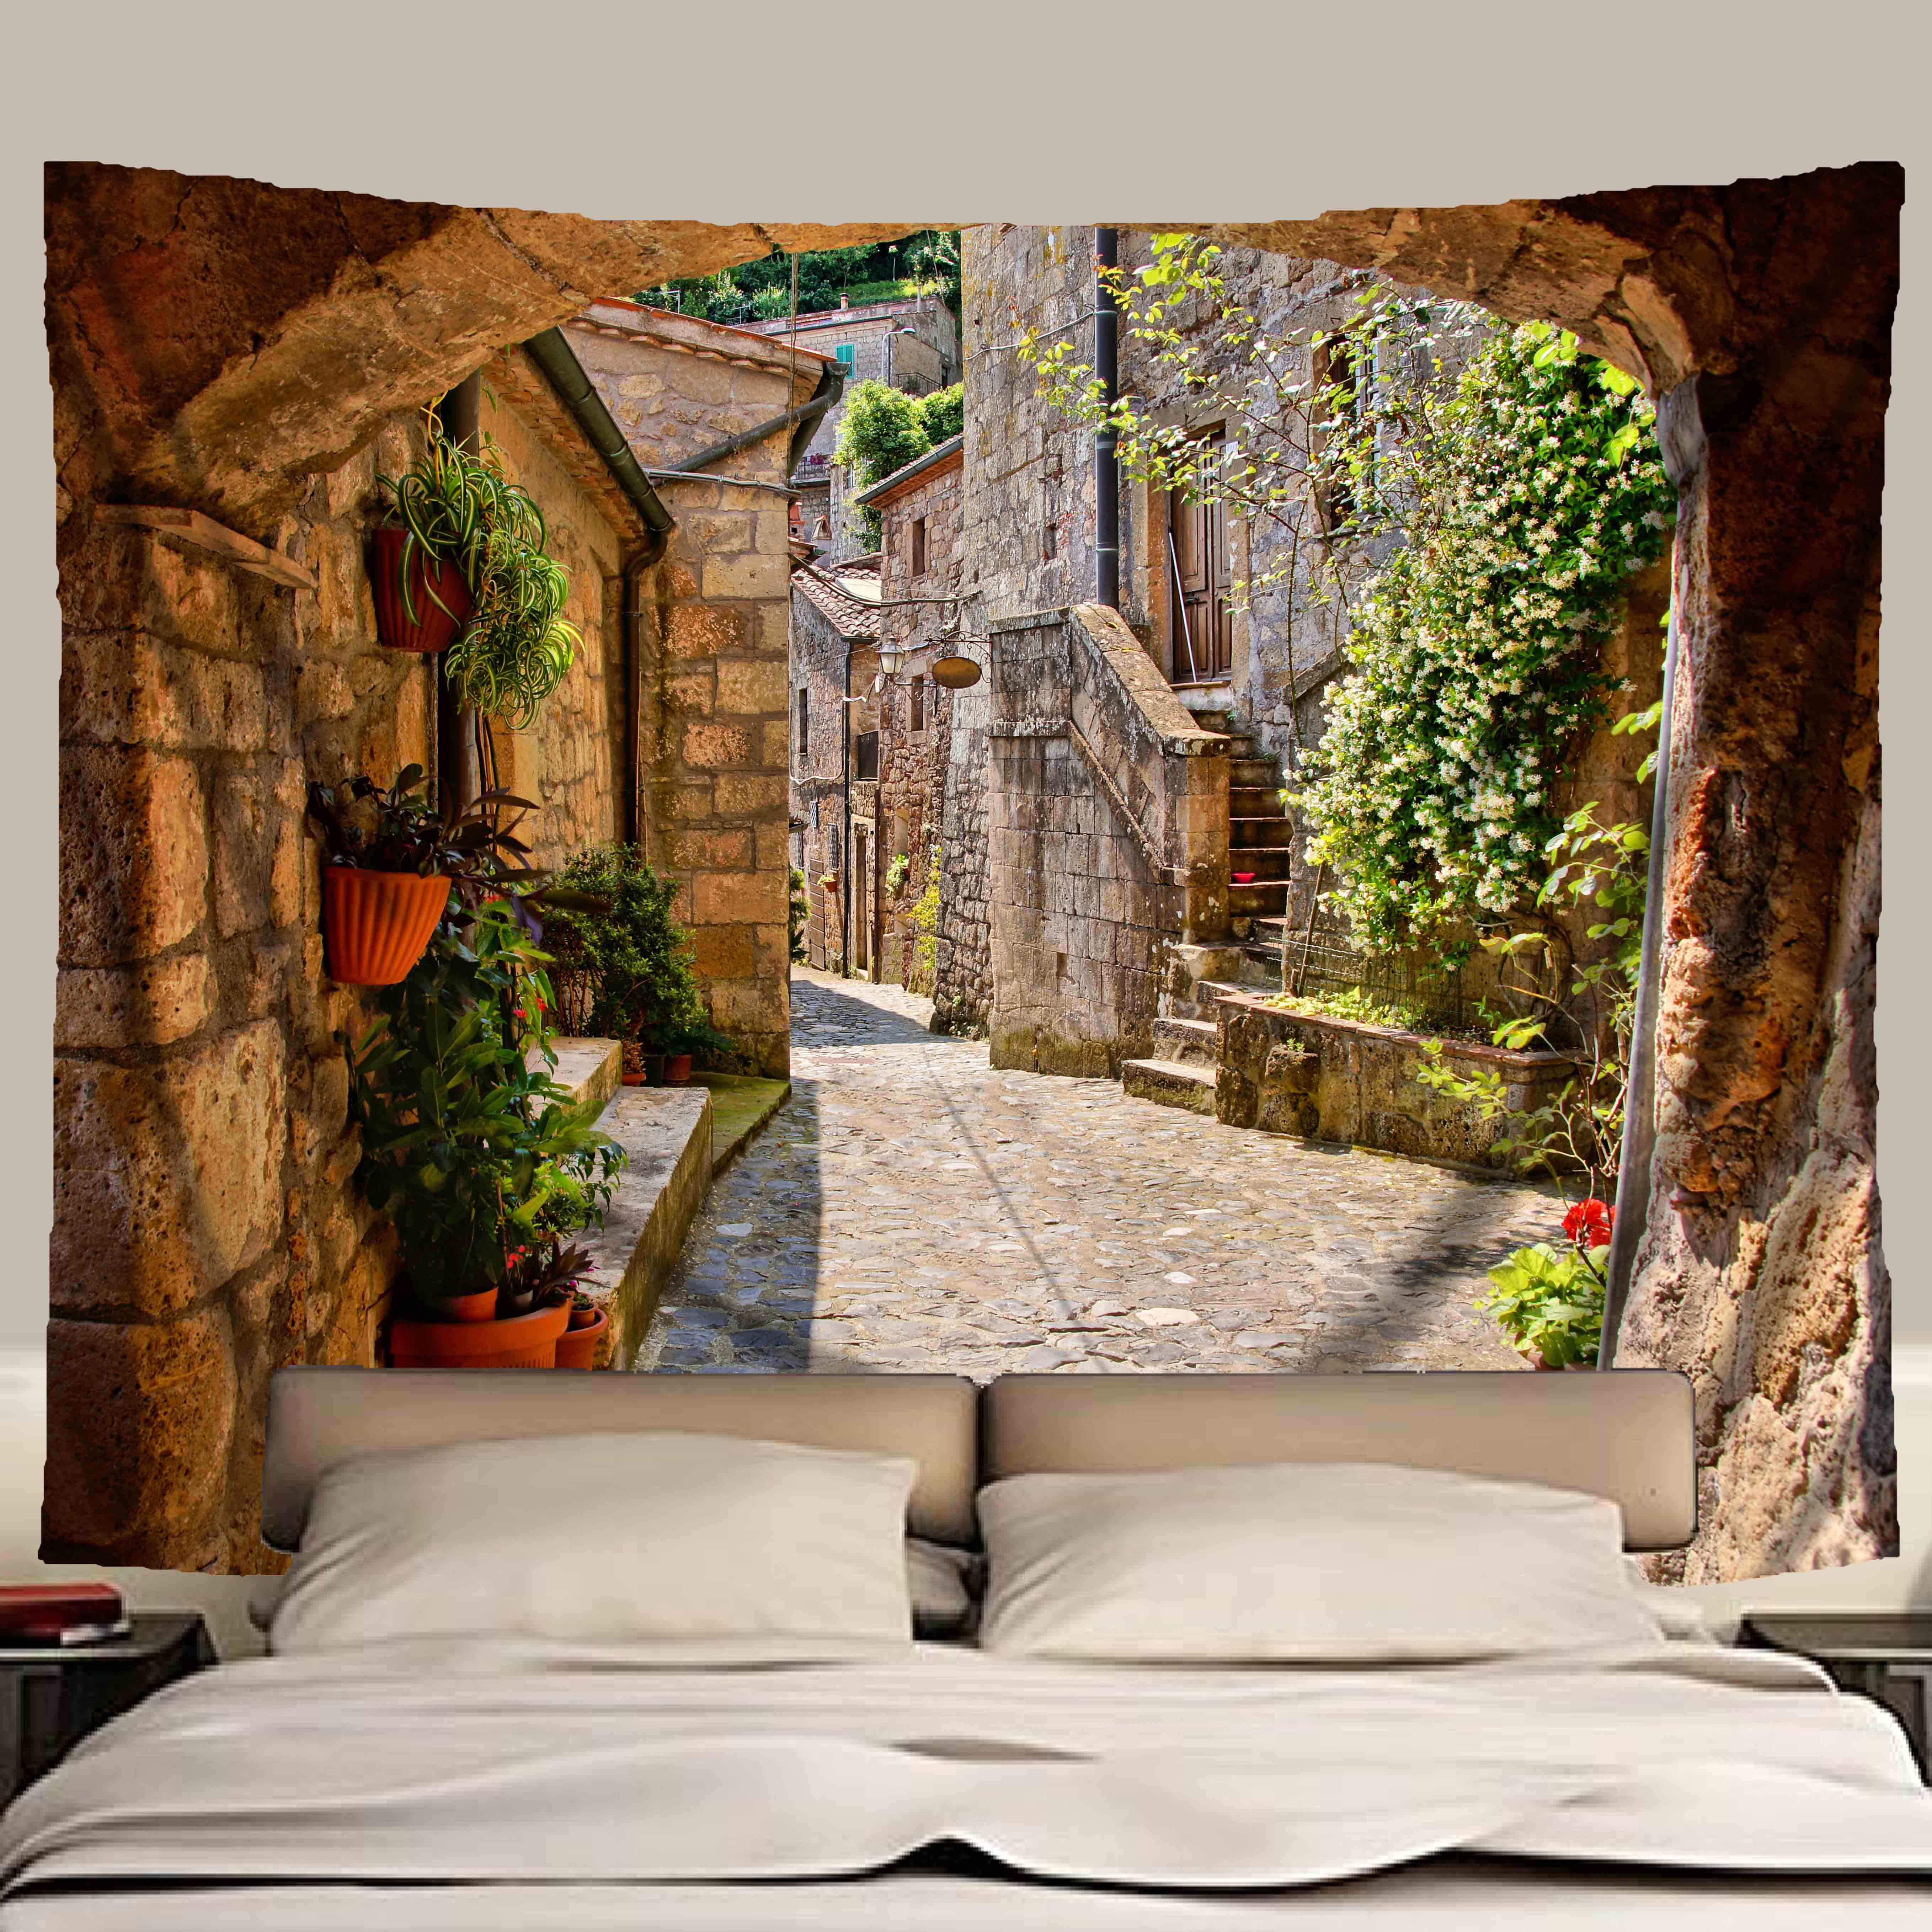 Italian Town Scenery Tapestry Wall Hanging Home Decoration For Living Room Bedroom Dorm Art Deck, Sold As 1 Panel